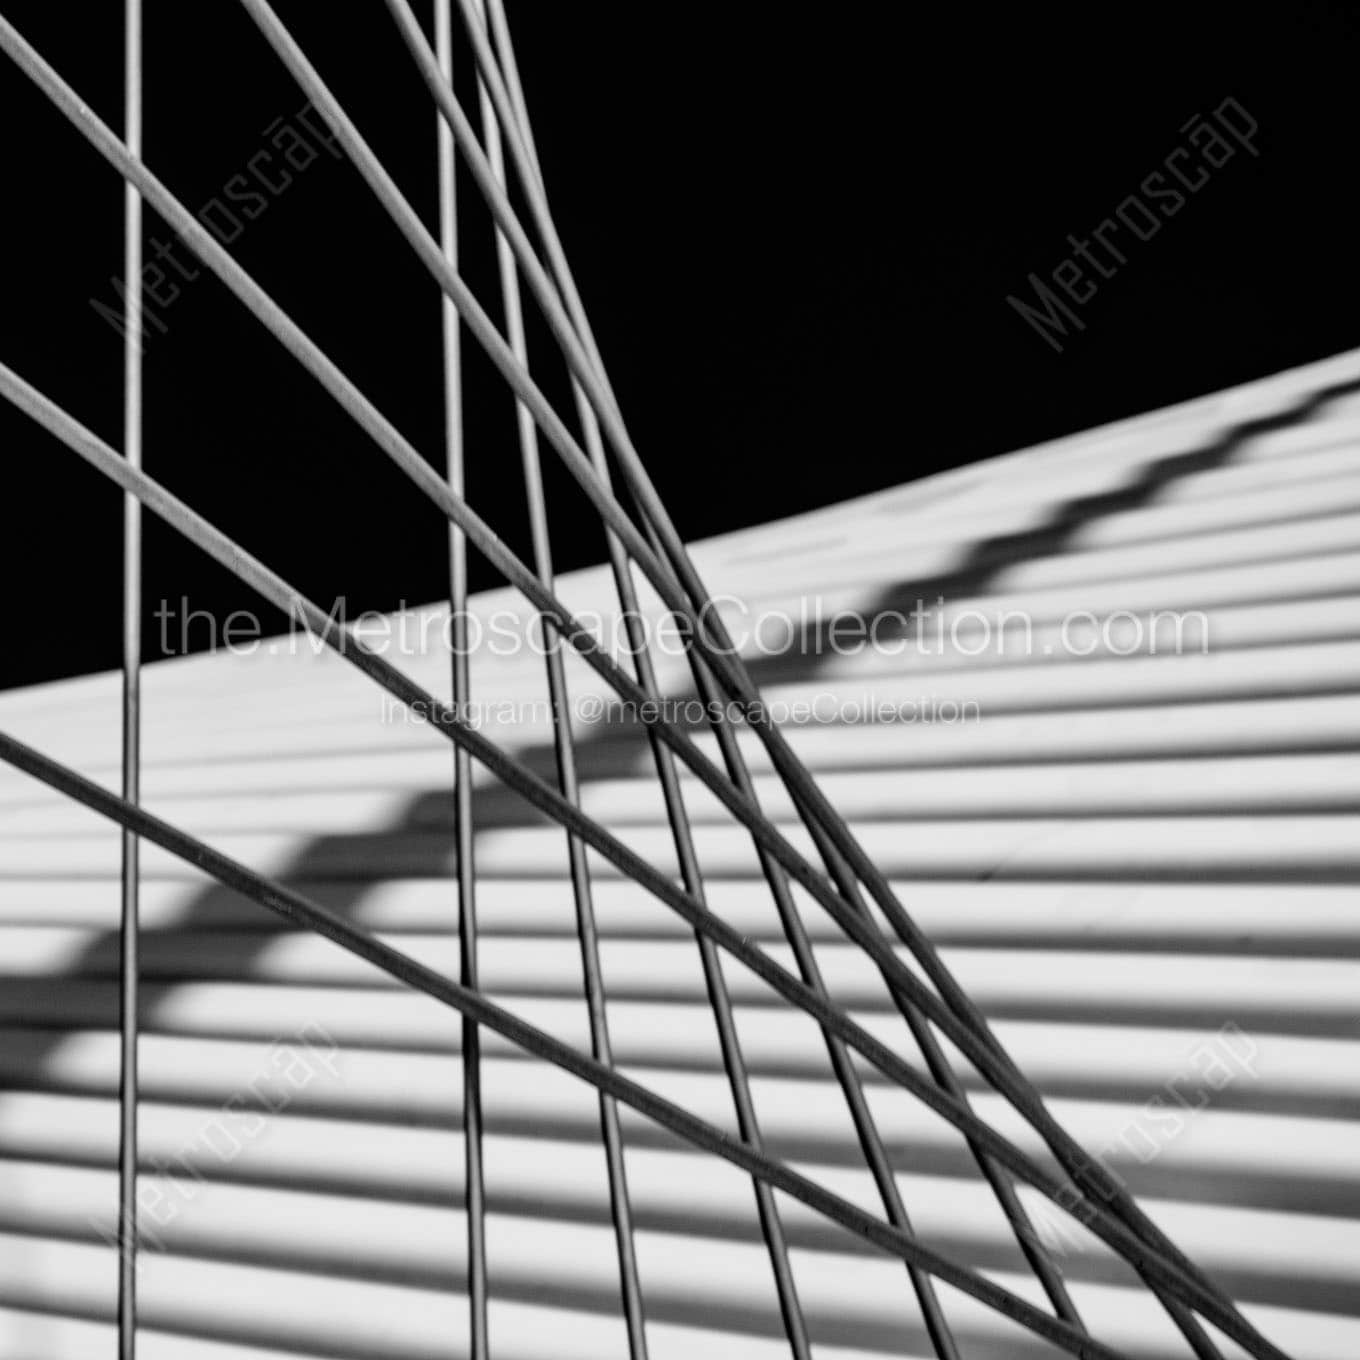 milwaukee art museum support cables Black & White Office Art